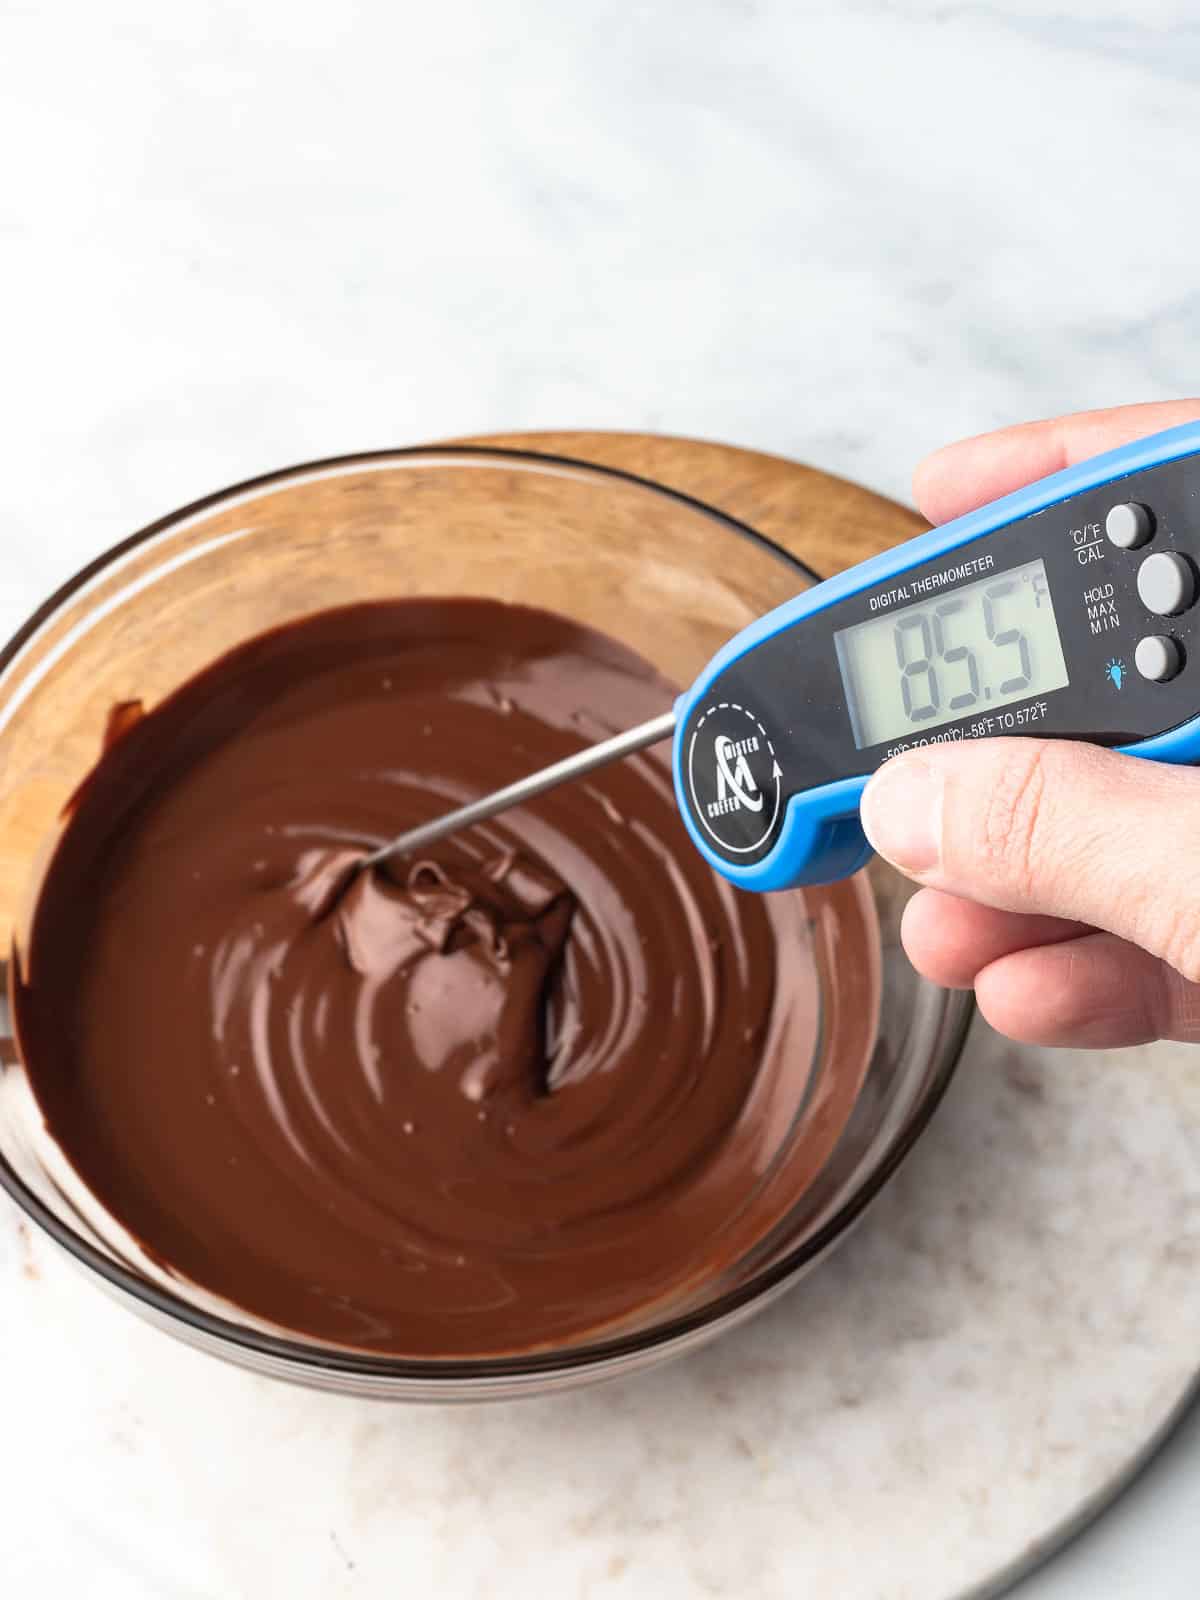 https://www.cookinwithmima.com/wp-content/uploads/2022/09/how-to-melt-chocolate-7.jpg